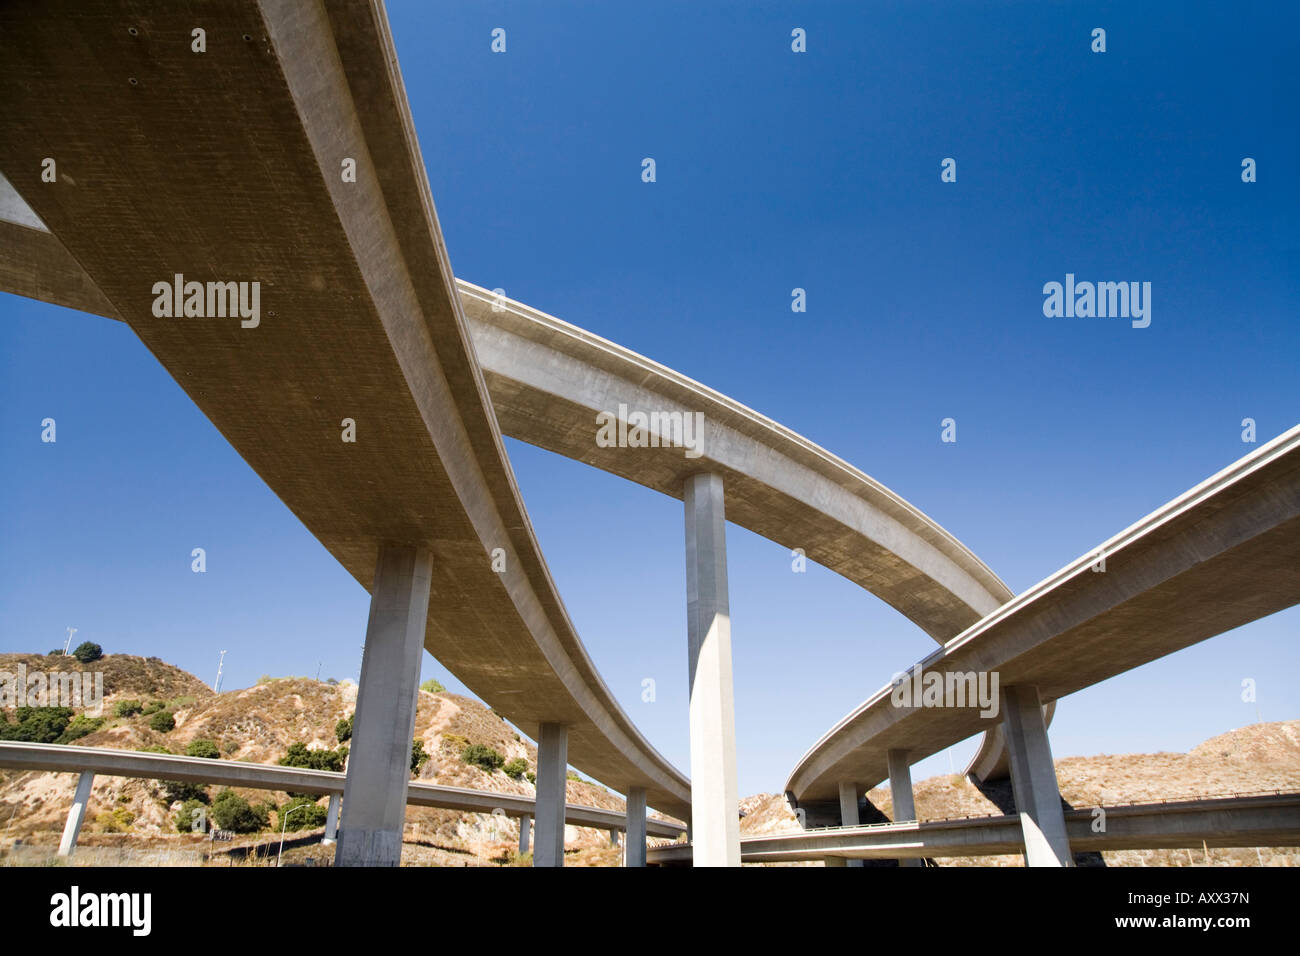 Interstate 5 and California Highway 14 Freeway Interchange in Los Angeles Stock Photo